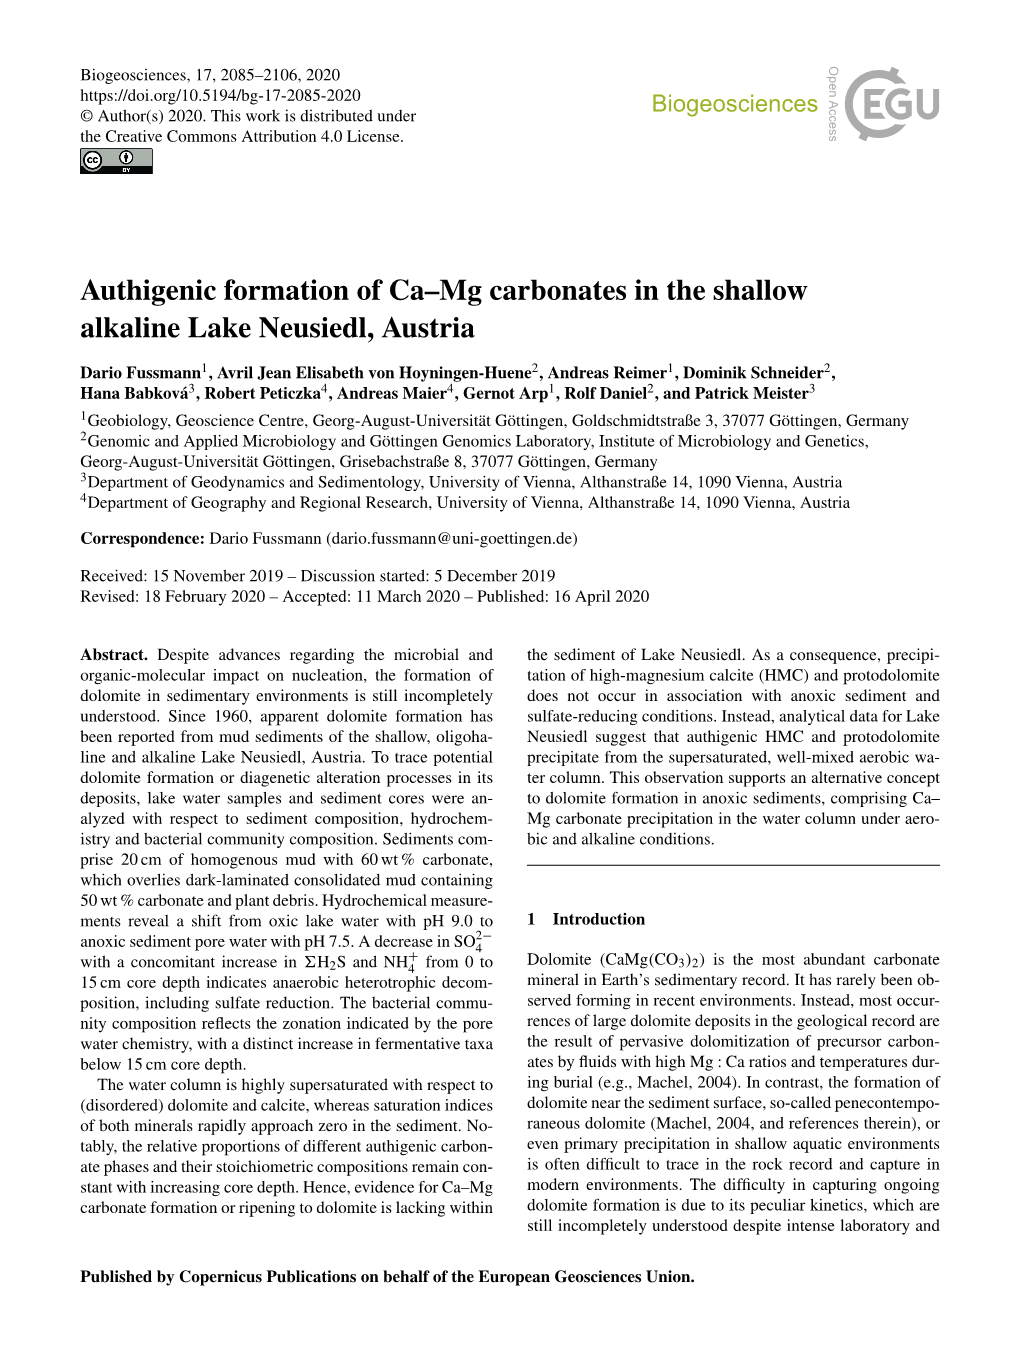 Authigenic Formation of Ca–Mg Carbonates in the Shallow Alkaline Lake Neusiedl, Austria